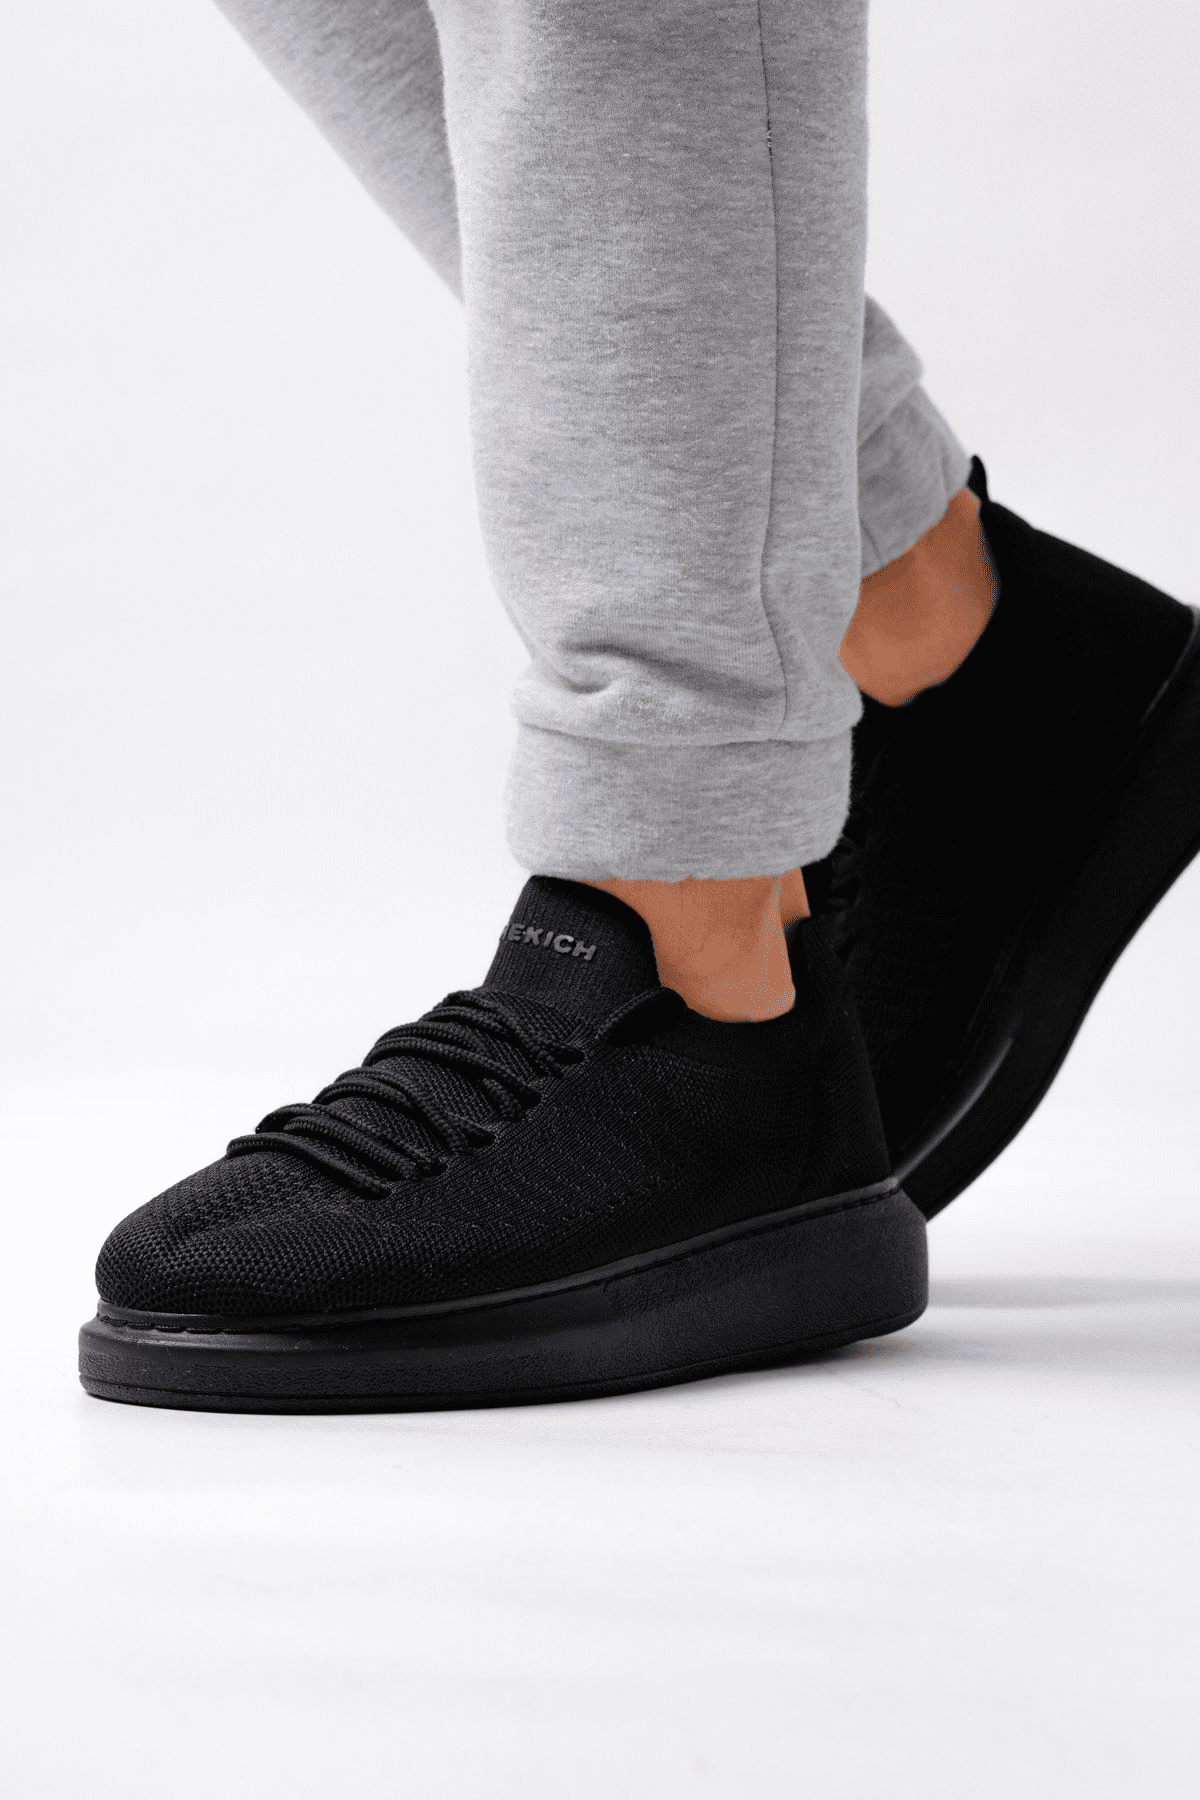 Chekich Men's Shoes Black Color Lace-Up Closure Knitting Fabric Material Comfortable Stitched Sole Daily Sneakers CH307 ST